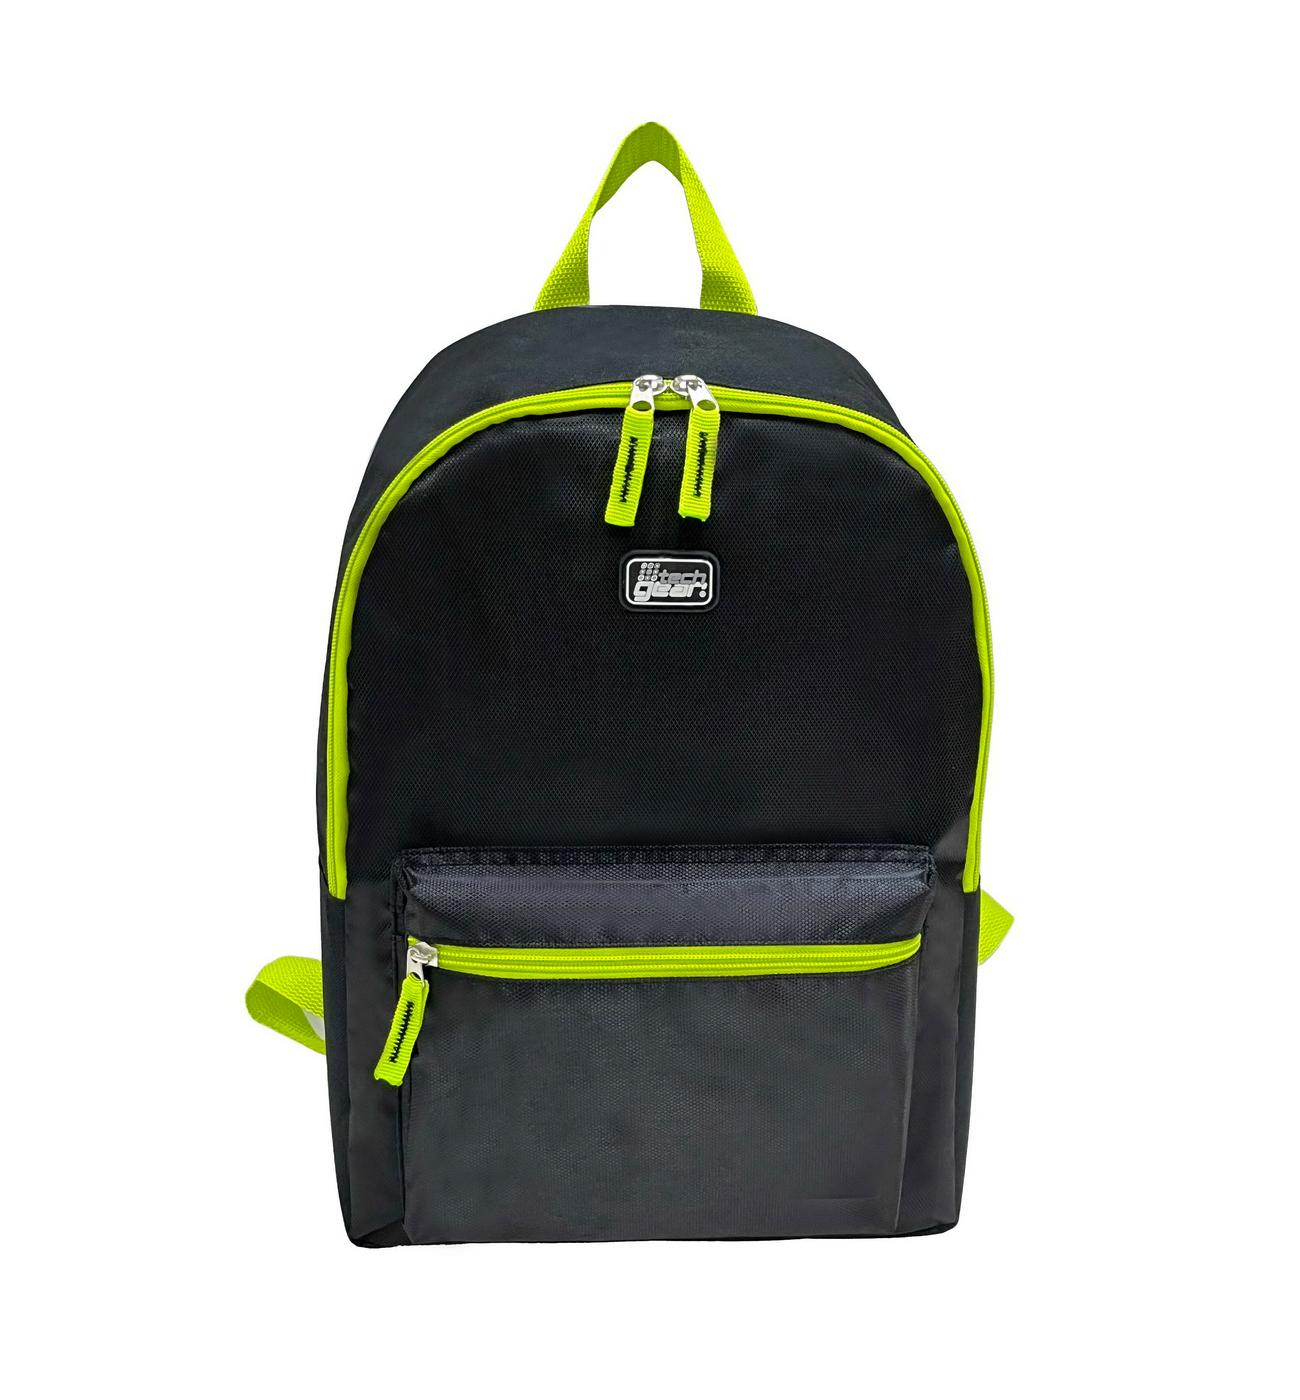 Tech Gear Classic Backpack - Black & Green; image 1 of 4